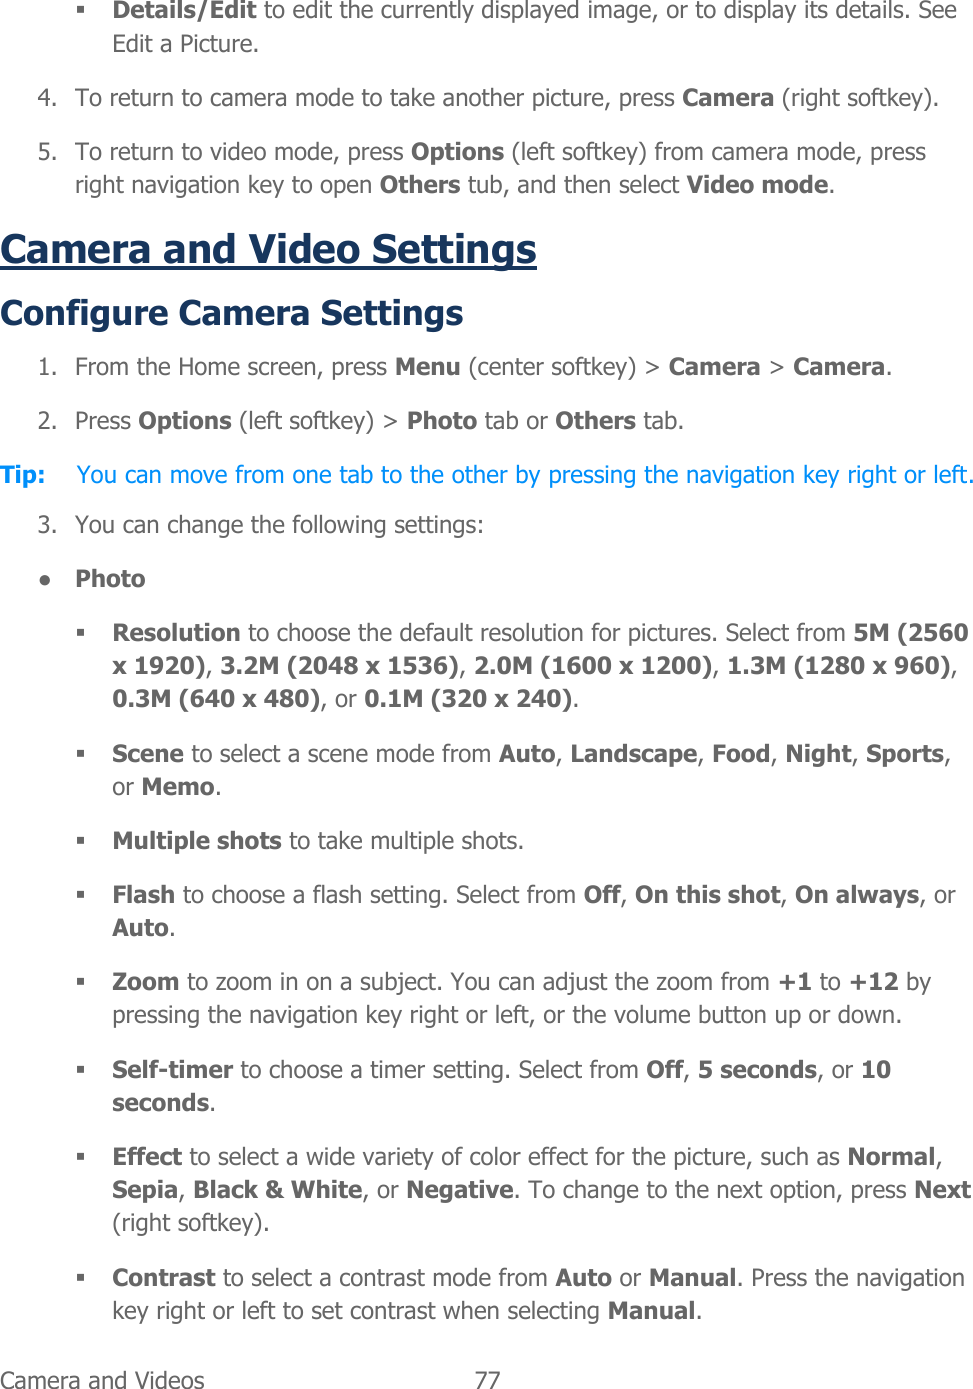  Camera and Videos   77    Details/Edit to edit the currently displayed image, or to display its details. See Edit a Picture. 4. To return to camera mode to take another picture, press Camera (right softkey). 5. To return to video mode, press Options (left softkey) from camera mode, press right navigation key to open Others tub, and then select Video mode.  Camera and Video Settings Configure Camera Settings 1. From the Home screen, press Menu (center softkey) &gt; Camera &gt; Camera. 2. Press Options (left softkey) &gt; Photo tab or Others tab. Tip:  You can move from one tab to the other by pressing the navigation key right or left. 3. You can change the following settings: ● Photo  Resolution to choose the default resolution for pictures. Select from 5M (2560 x 1920), 3.2M (2048 x 1536), 2.0M (1600 x 1200), 1.3M (1280 x 960), 0.3M (640 x 480), or 0.1M (320 x 240).  Scene to select a scene mode from Auto, Landscape, Food, Night, Sports, or Memo.  Multiple shots to take multiple shots.  Flash to choose a flash setting. Select from Off, On this shot, On always, or Auto.  Zoom to zoom in on a subject. You can adjust the zoom from +1 to +12 by pressing the navigation key right or left, or the volume button up or down.  Self-timer to choose a timer setting. Select from Off, 5 seconds, or 10 seconds.  Effect to select a wide variety of color effect for the picture, such as Normal, Sepia, Black &amp; White, or Negative. To change to the next option, press Next (right softkey).  Contrast to select a contrast mode from Auto or Manual. Press the navigation key right or left to set contrast when selecting Manual. 